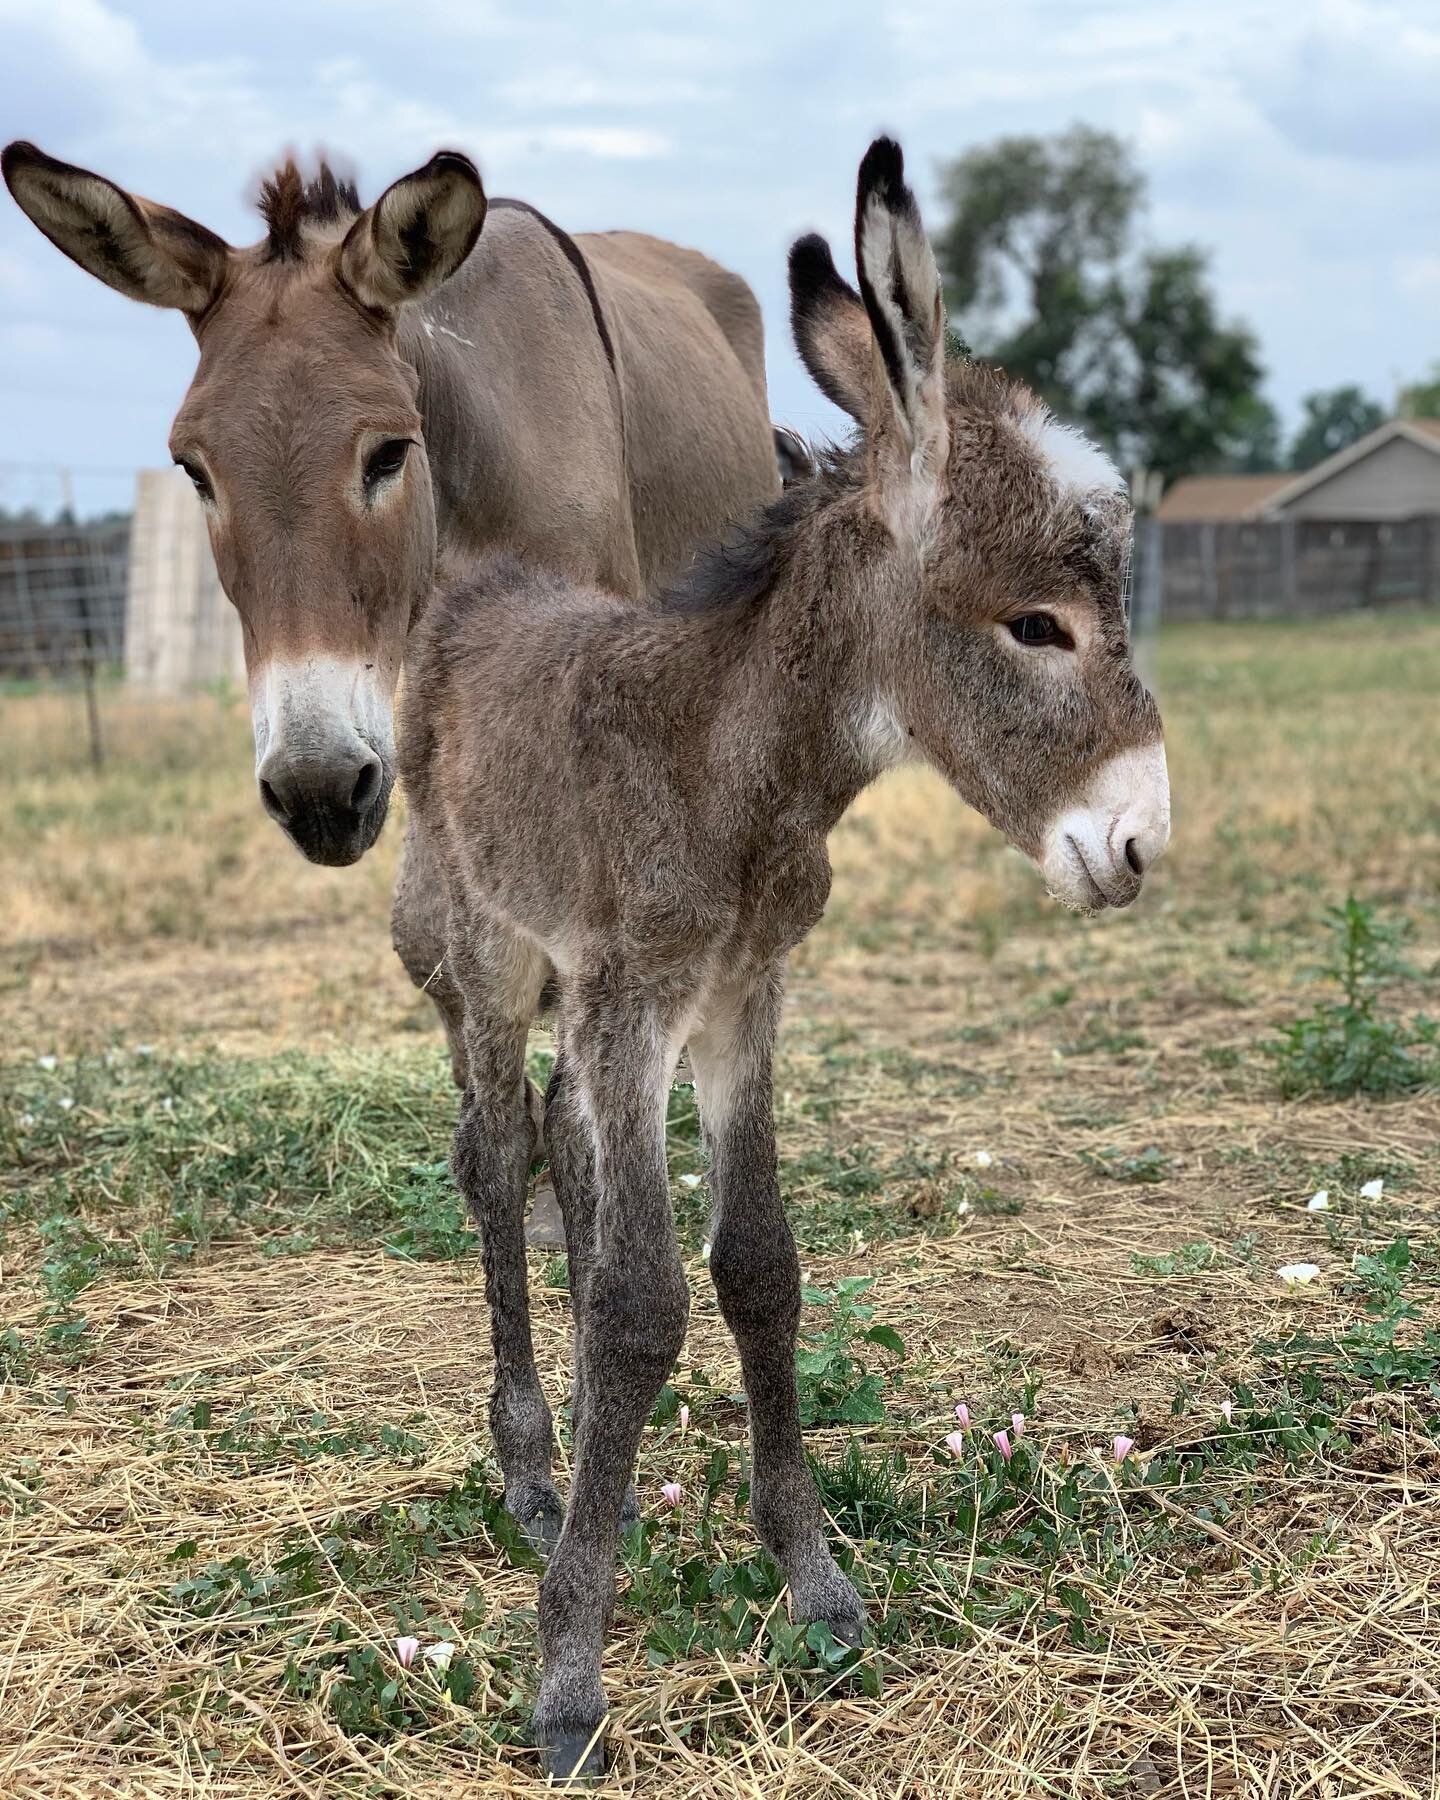 Happy National Donkey Day! Y&rsquo;all know that we love our sweet burros at Hestia Field, Aunt Jane and Watch (fun fact: they&rsquo;re both named after characters in the Boxcar Children book series). 

Aunt Jane came to us from @burrobasecamp in Mar